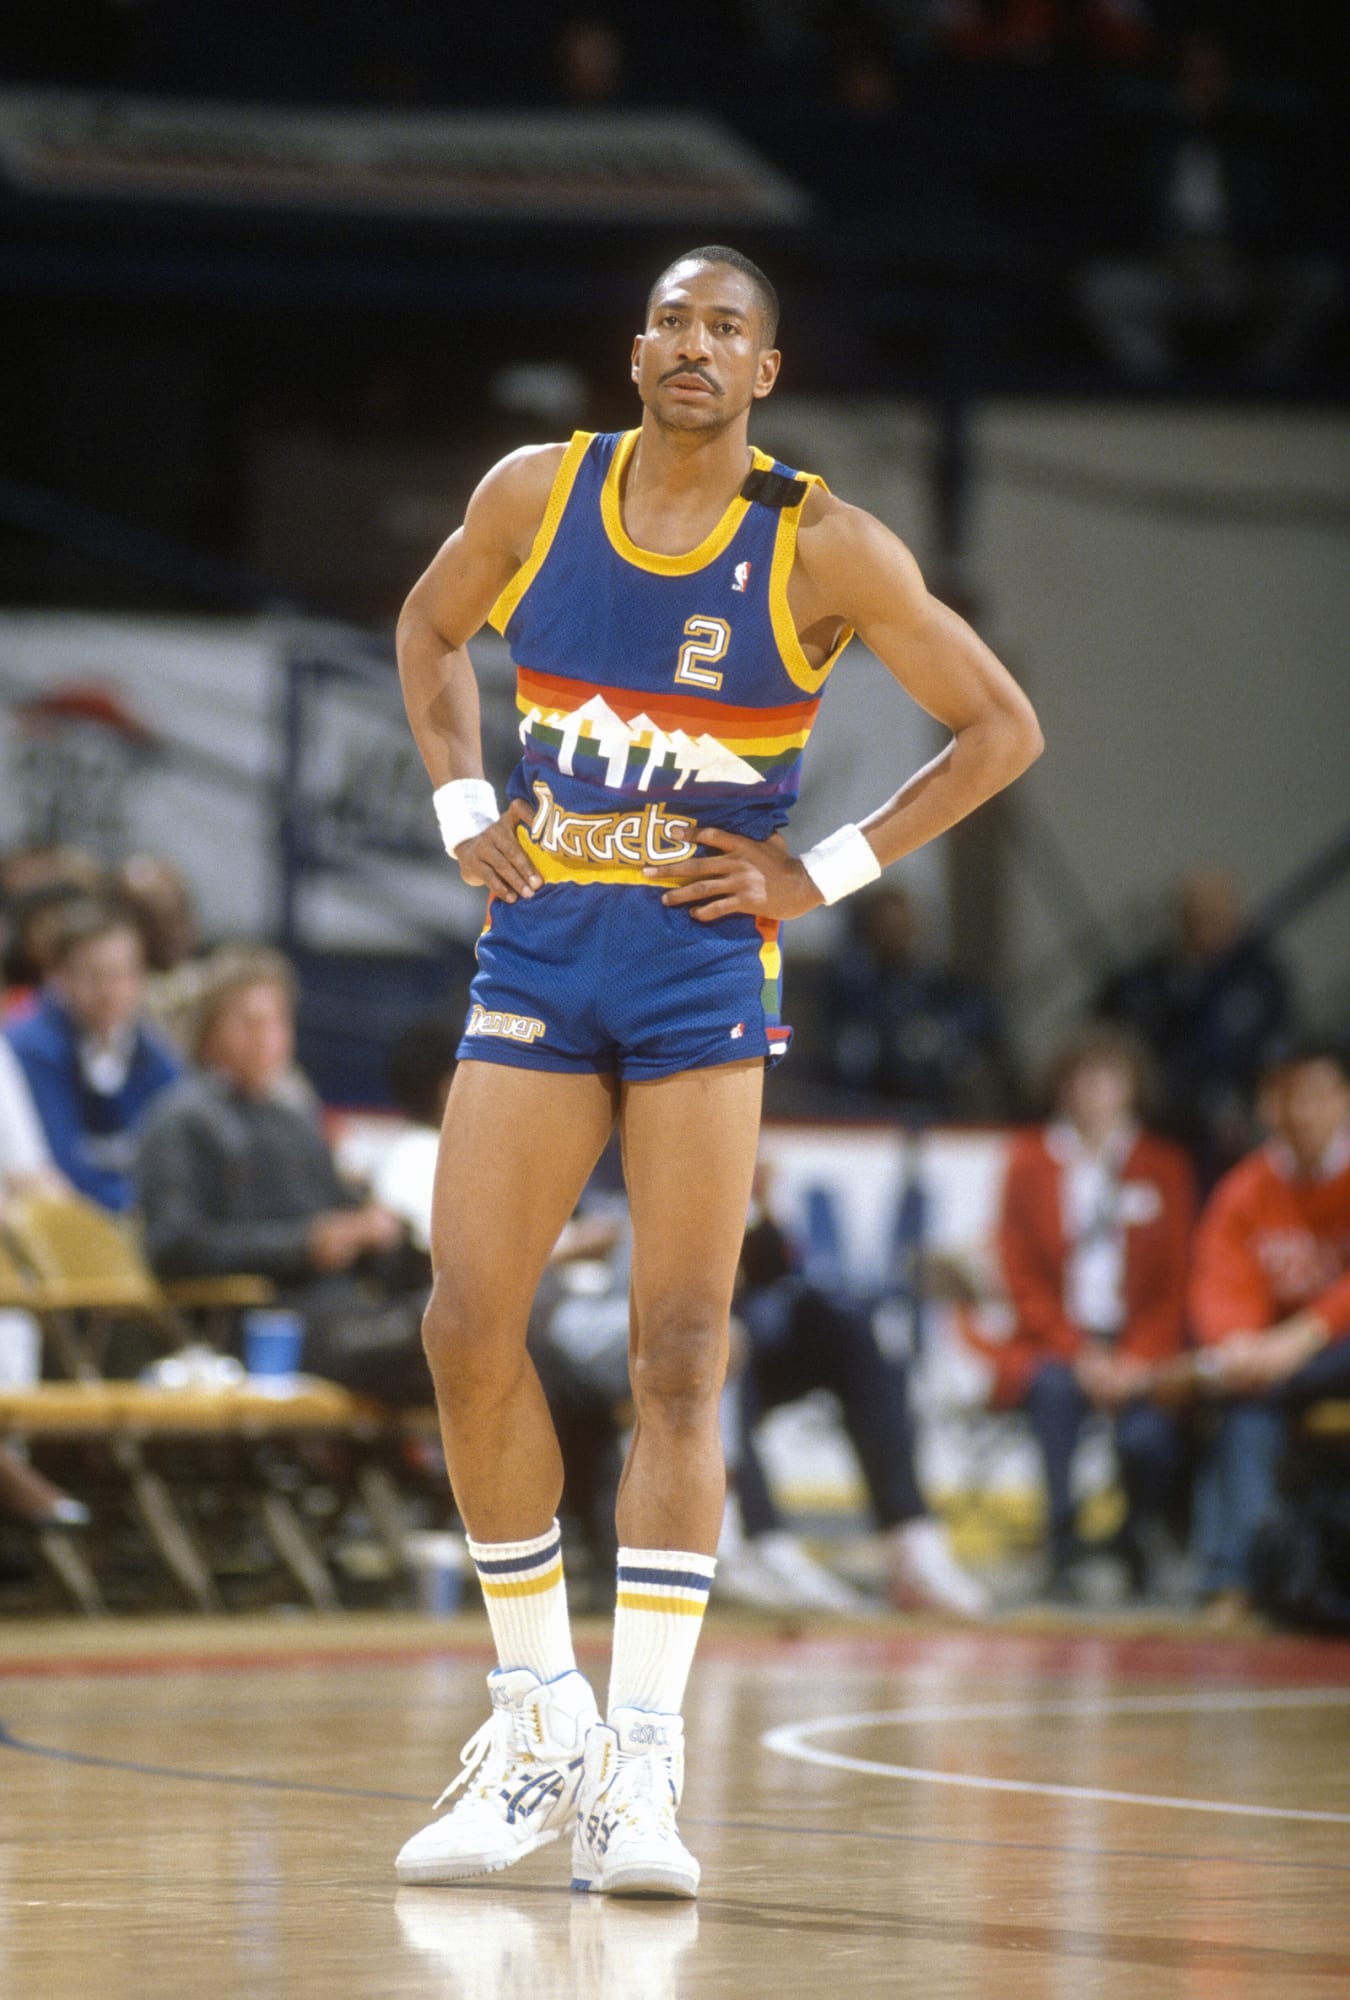 ESPN ranks Alex English as 67th best all-time player